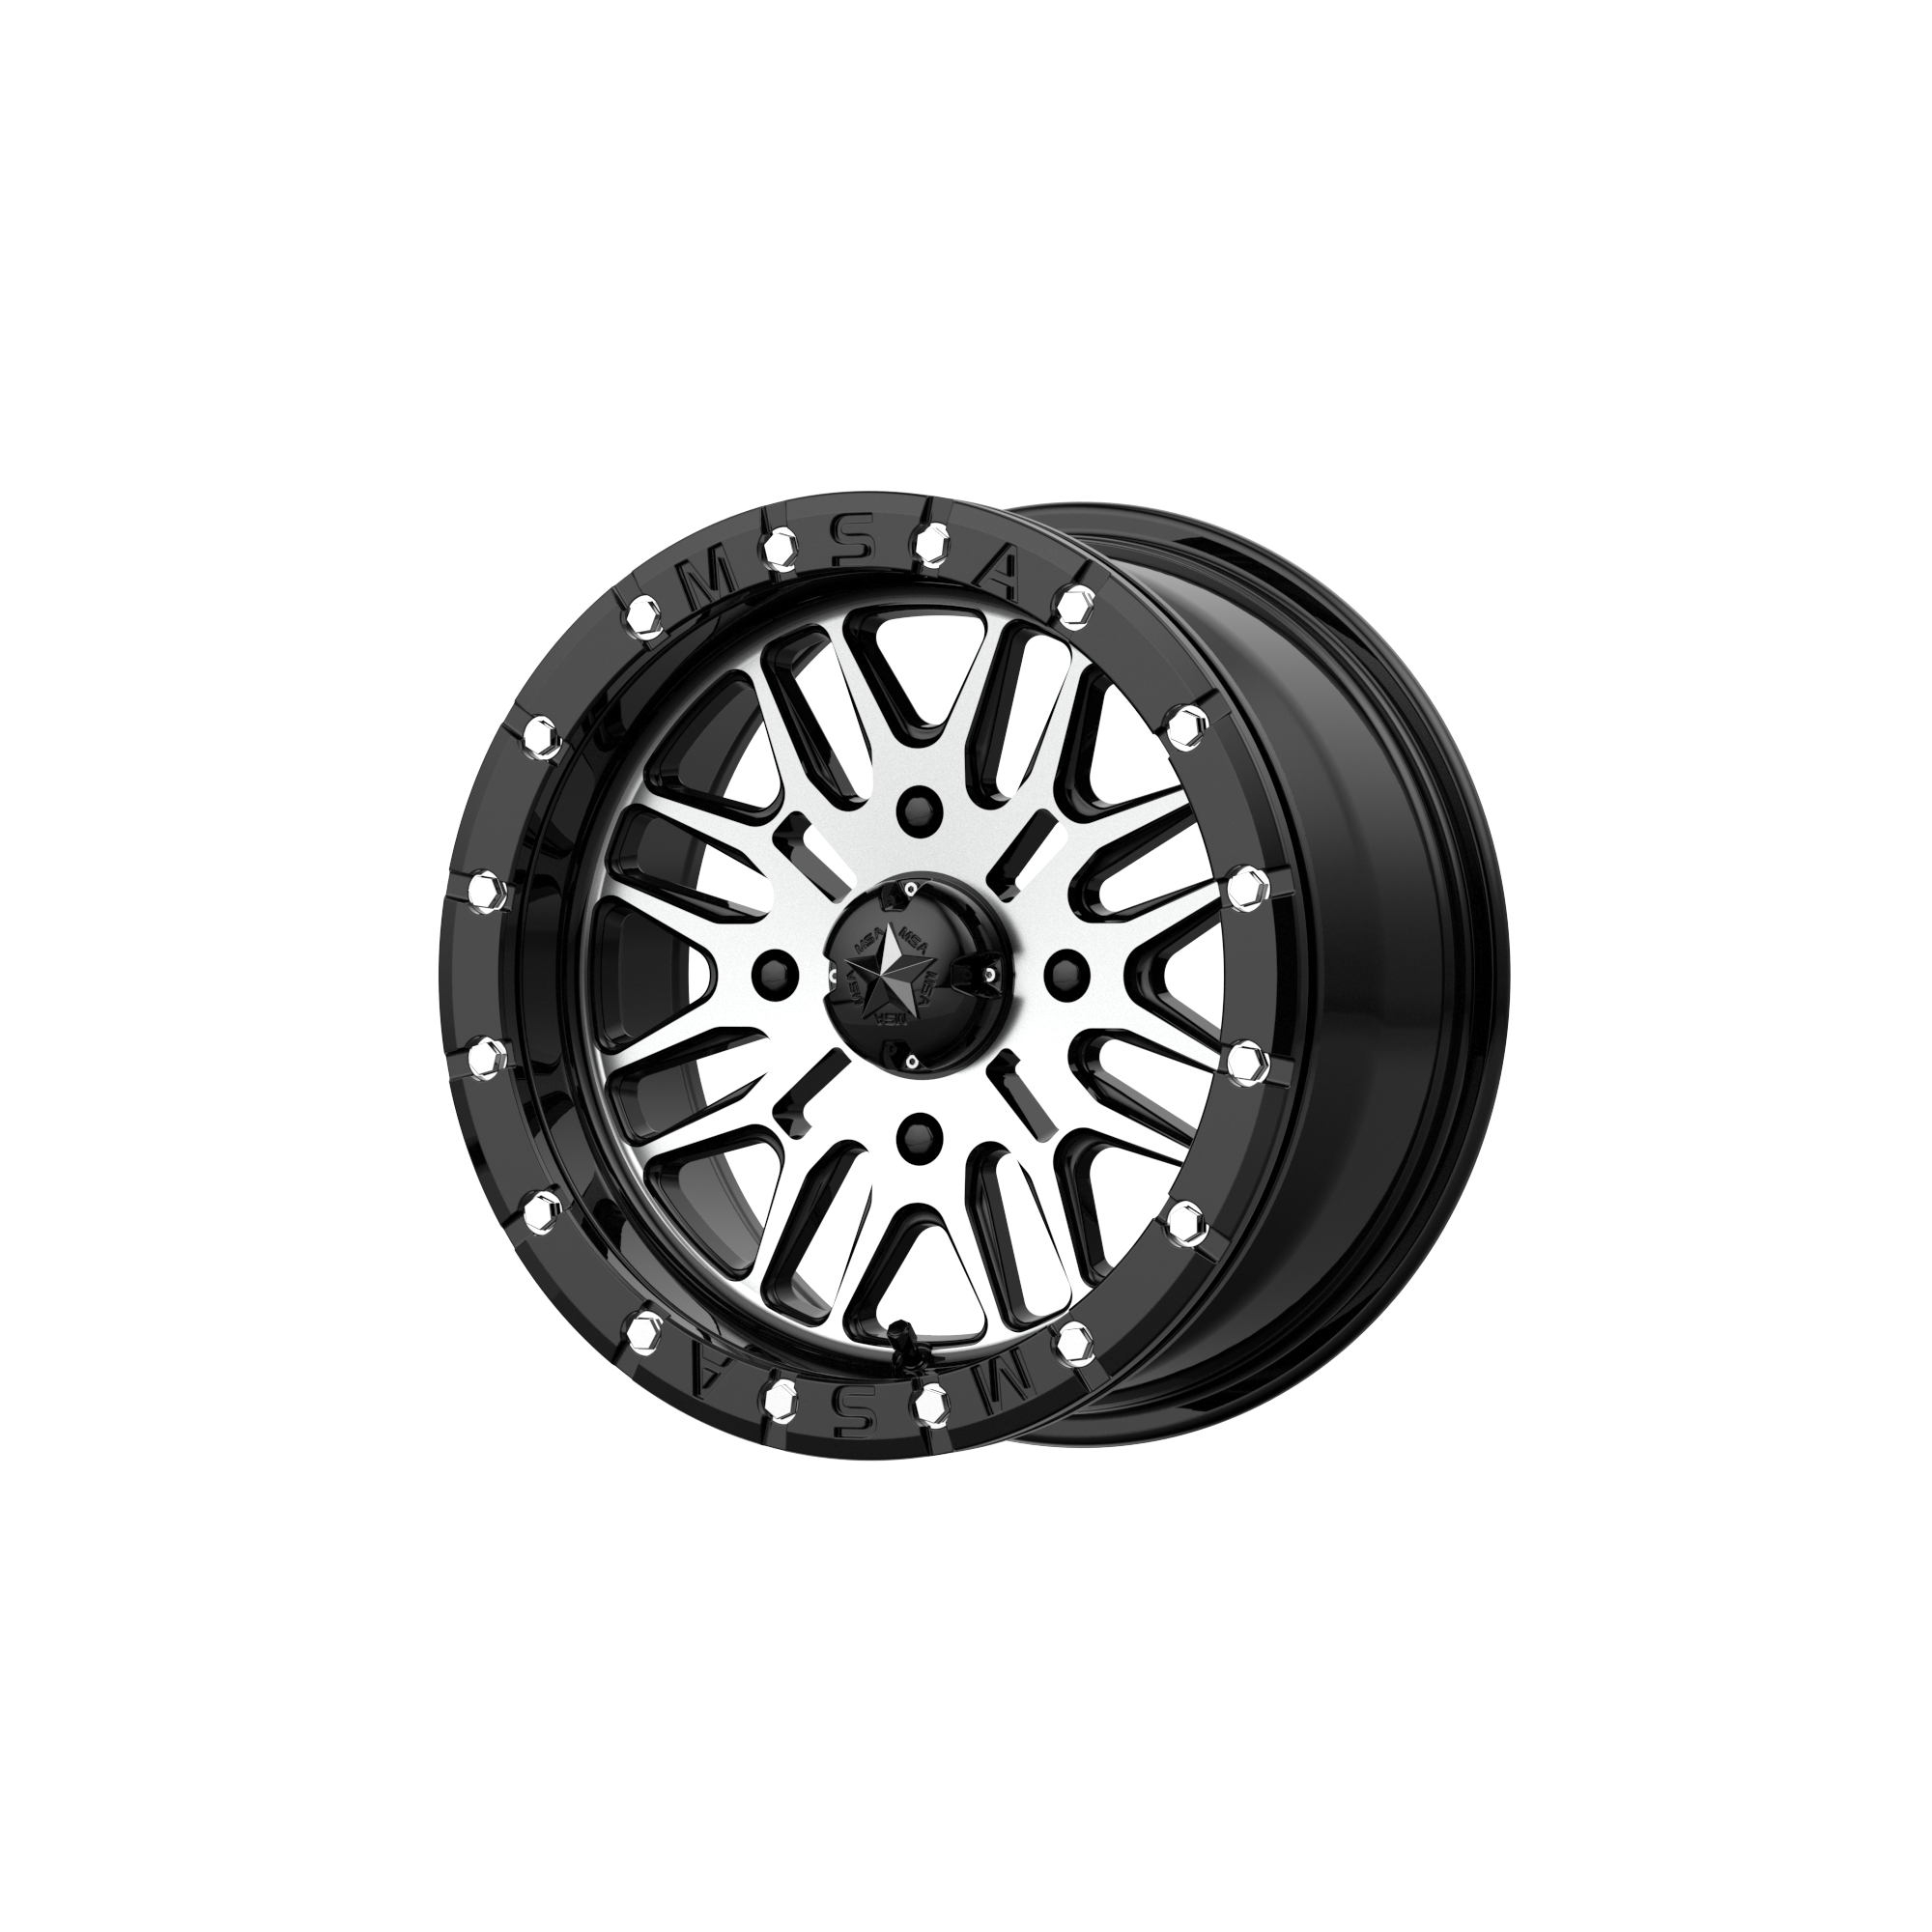 BRUTE BEADLOCK 15x7 4x156.00 GLOSS BLACK MACHINED (10 mm) - Tires and Engine Performance